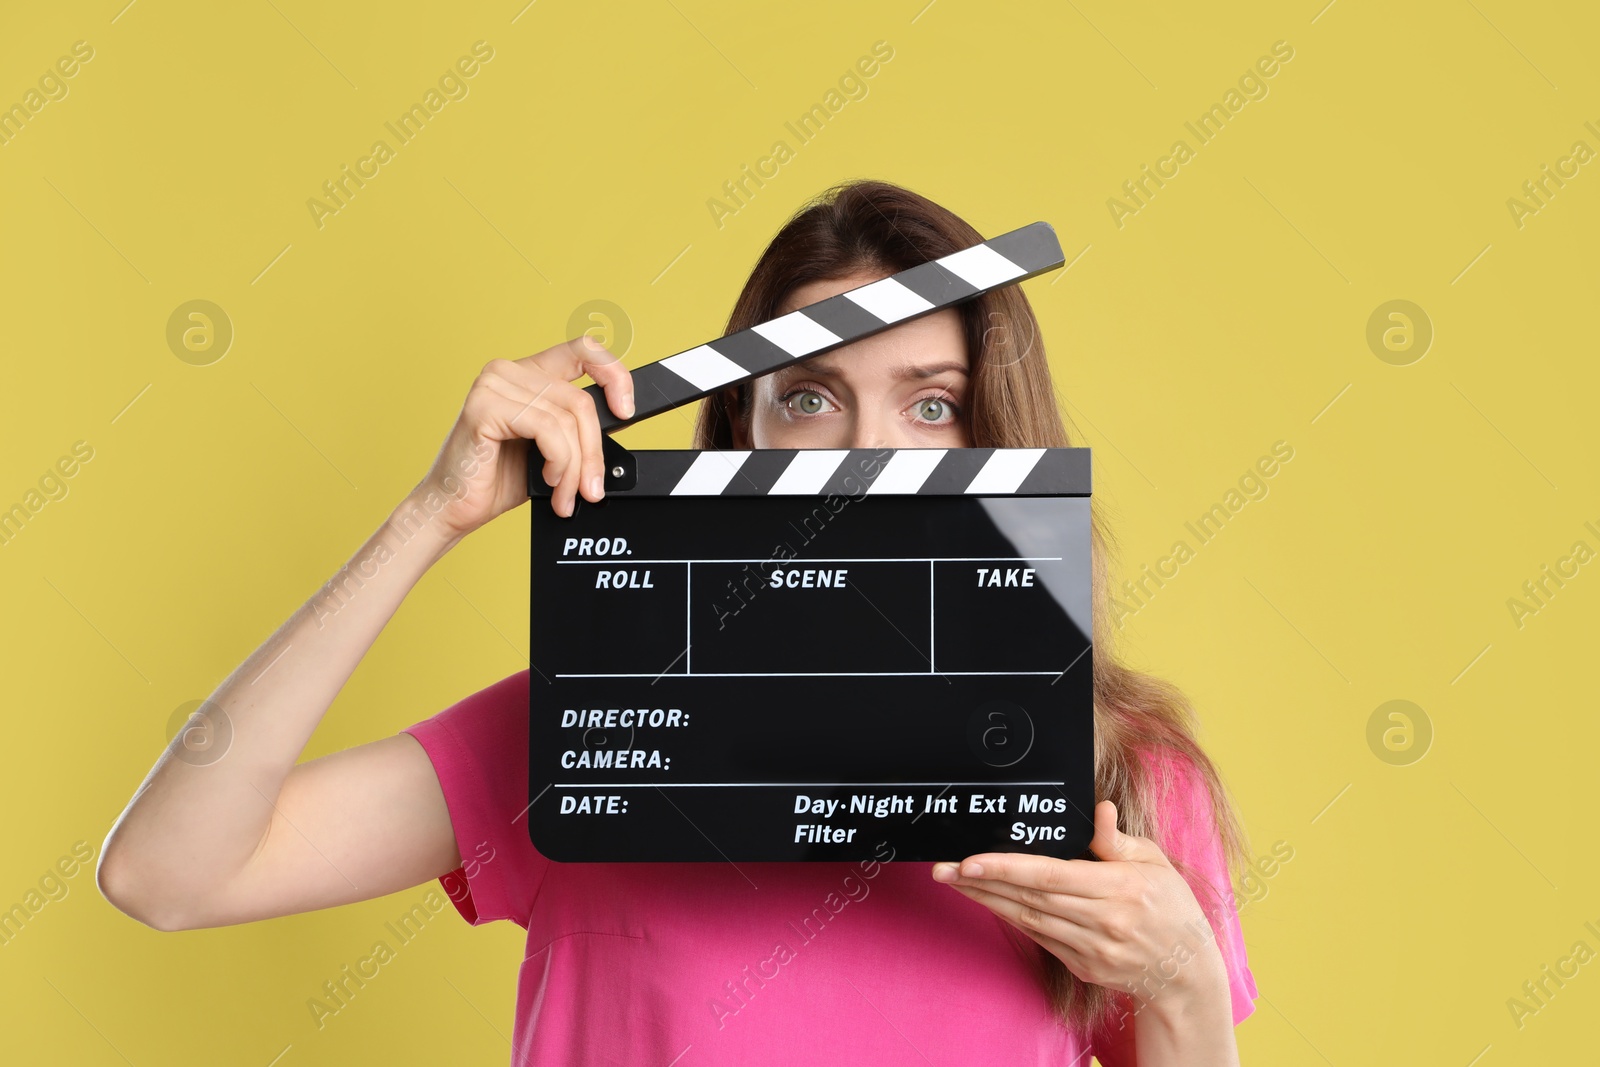 Photo of Making movie. Woman with clapperboard on yellow background